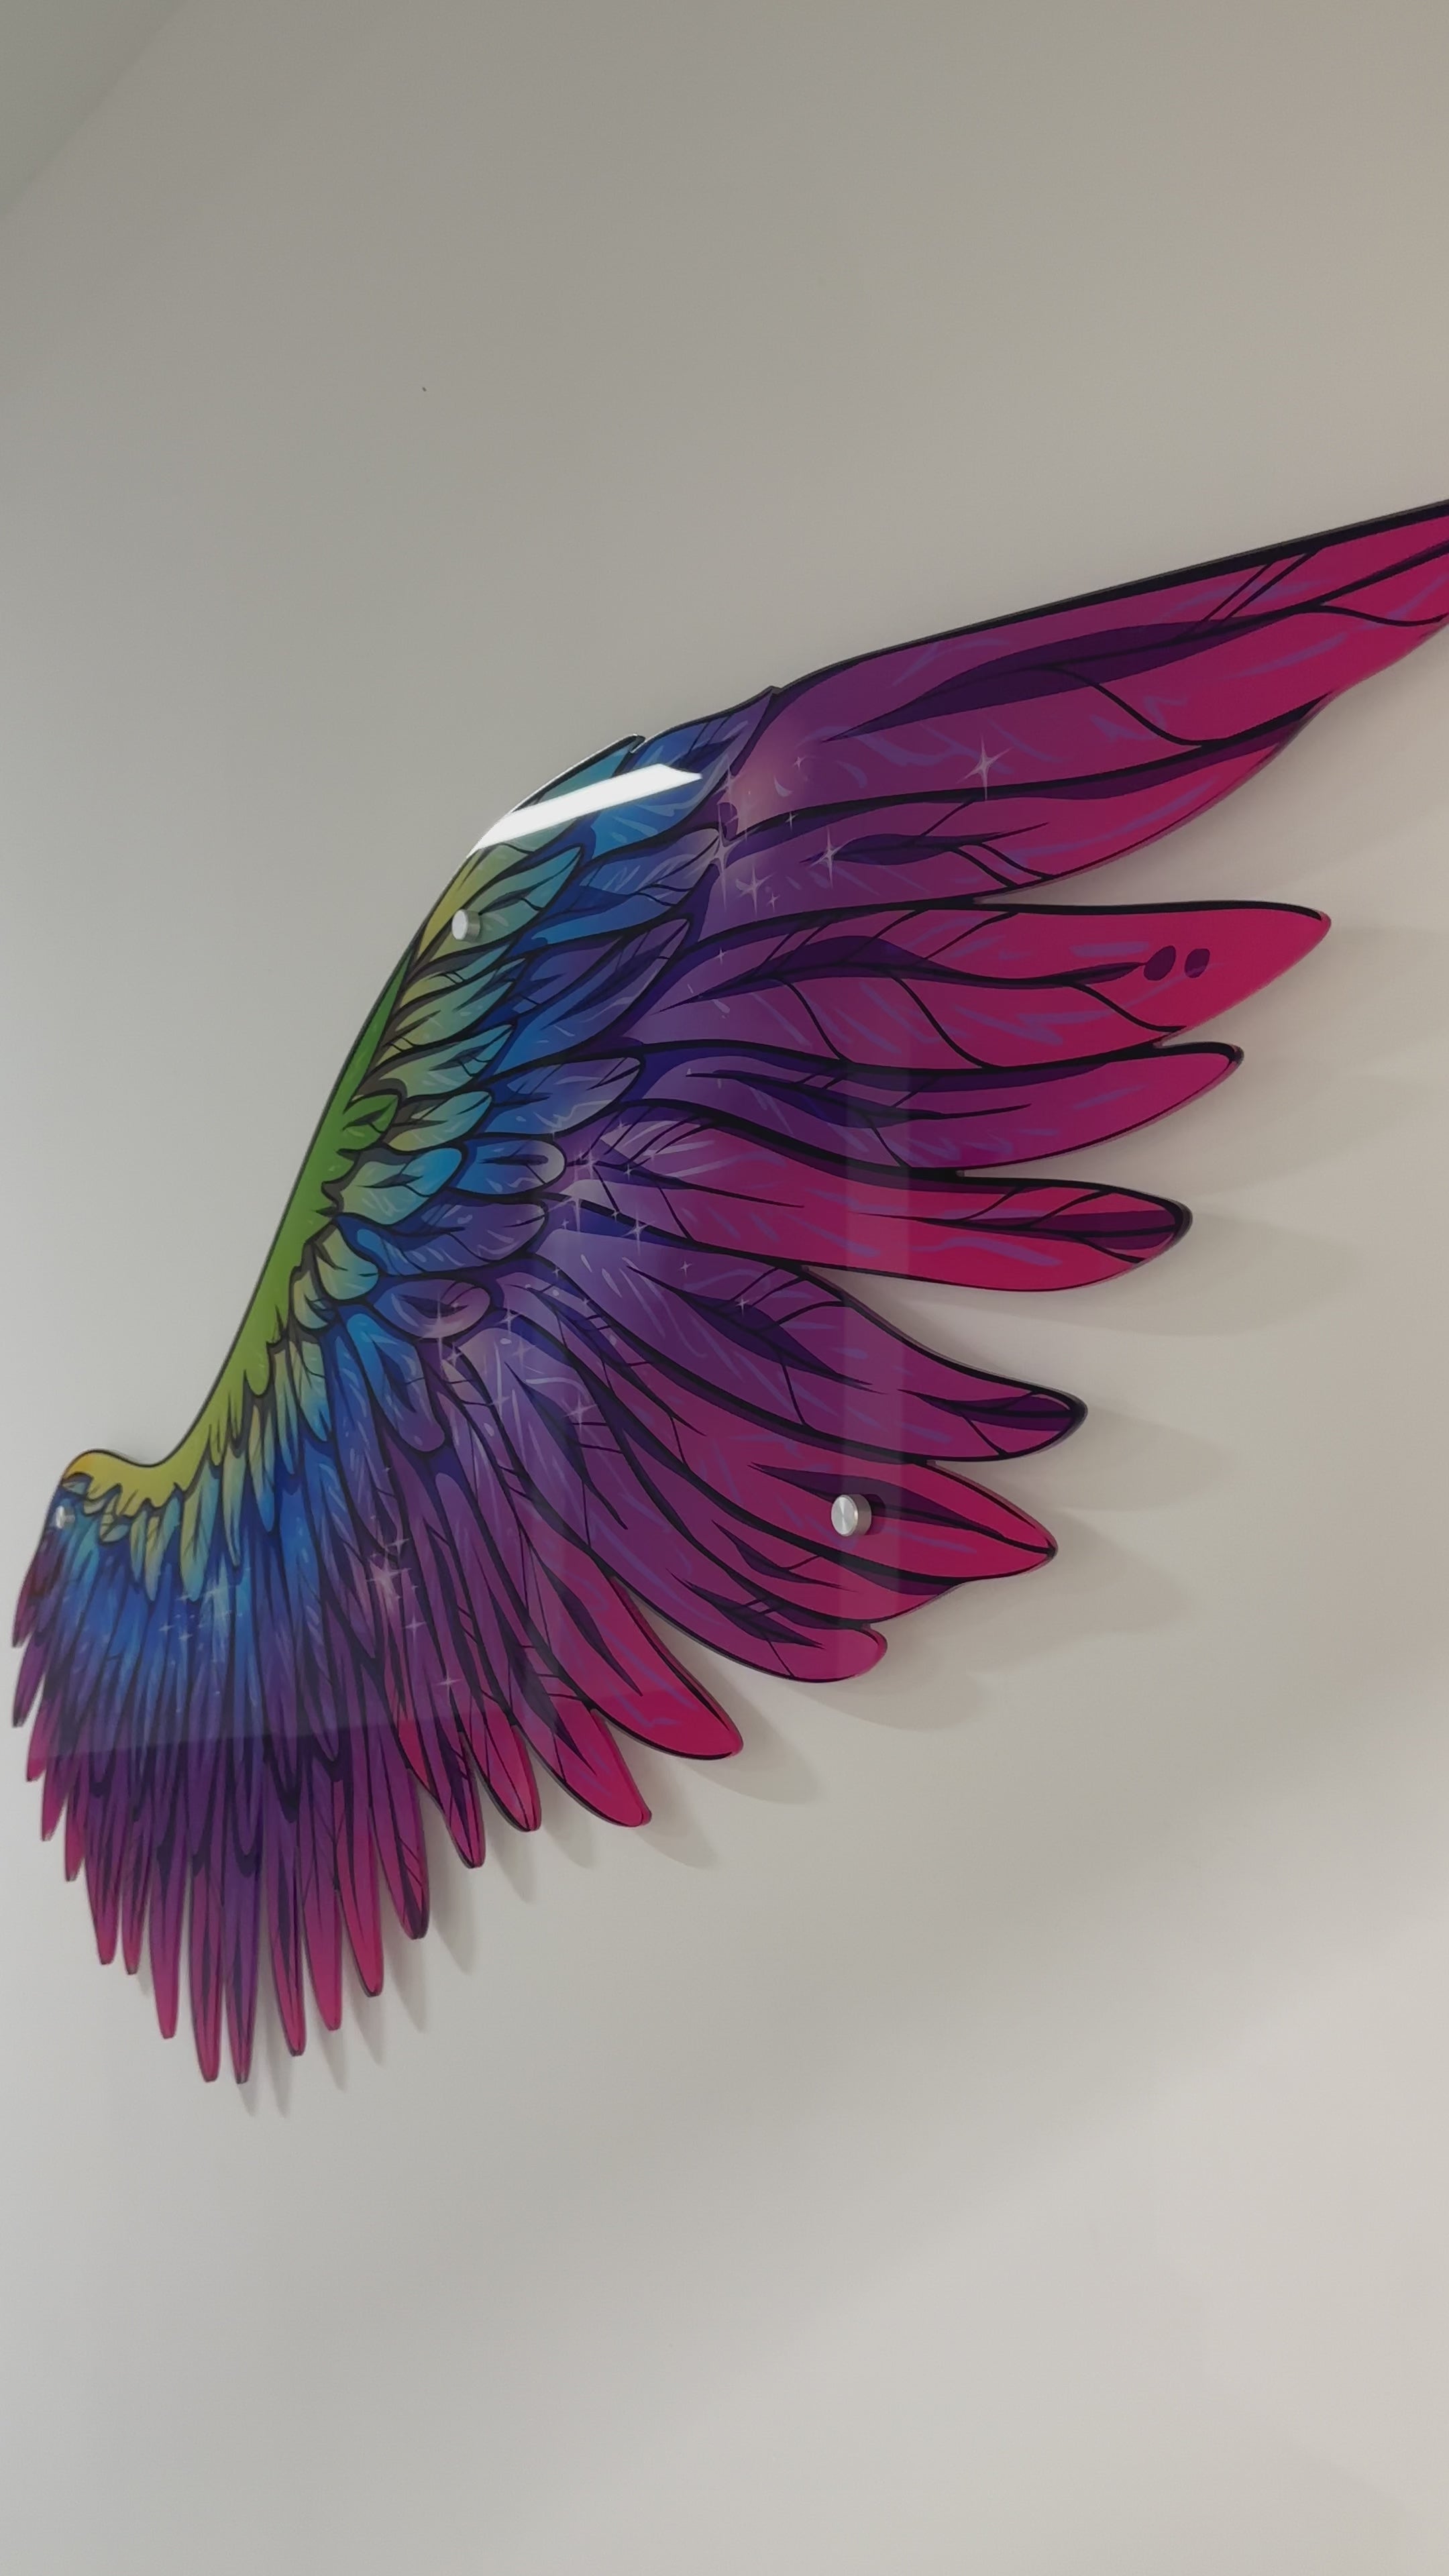 Multicolor Angel Wings / Printed Acrylic Art/ Printed Art / Wall Decor/Wall Sculpture/Abstract Wall Decor/ Gift buy at the best price with delivery – uniqstiq